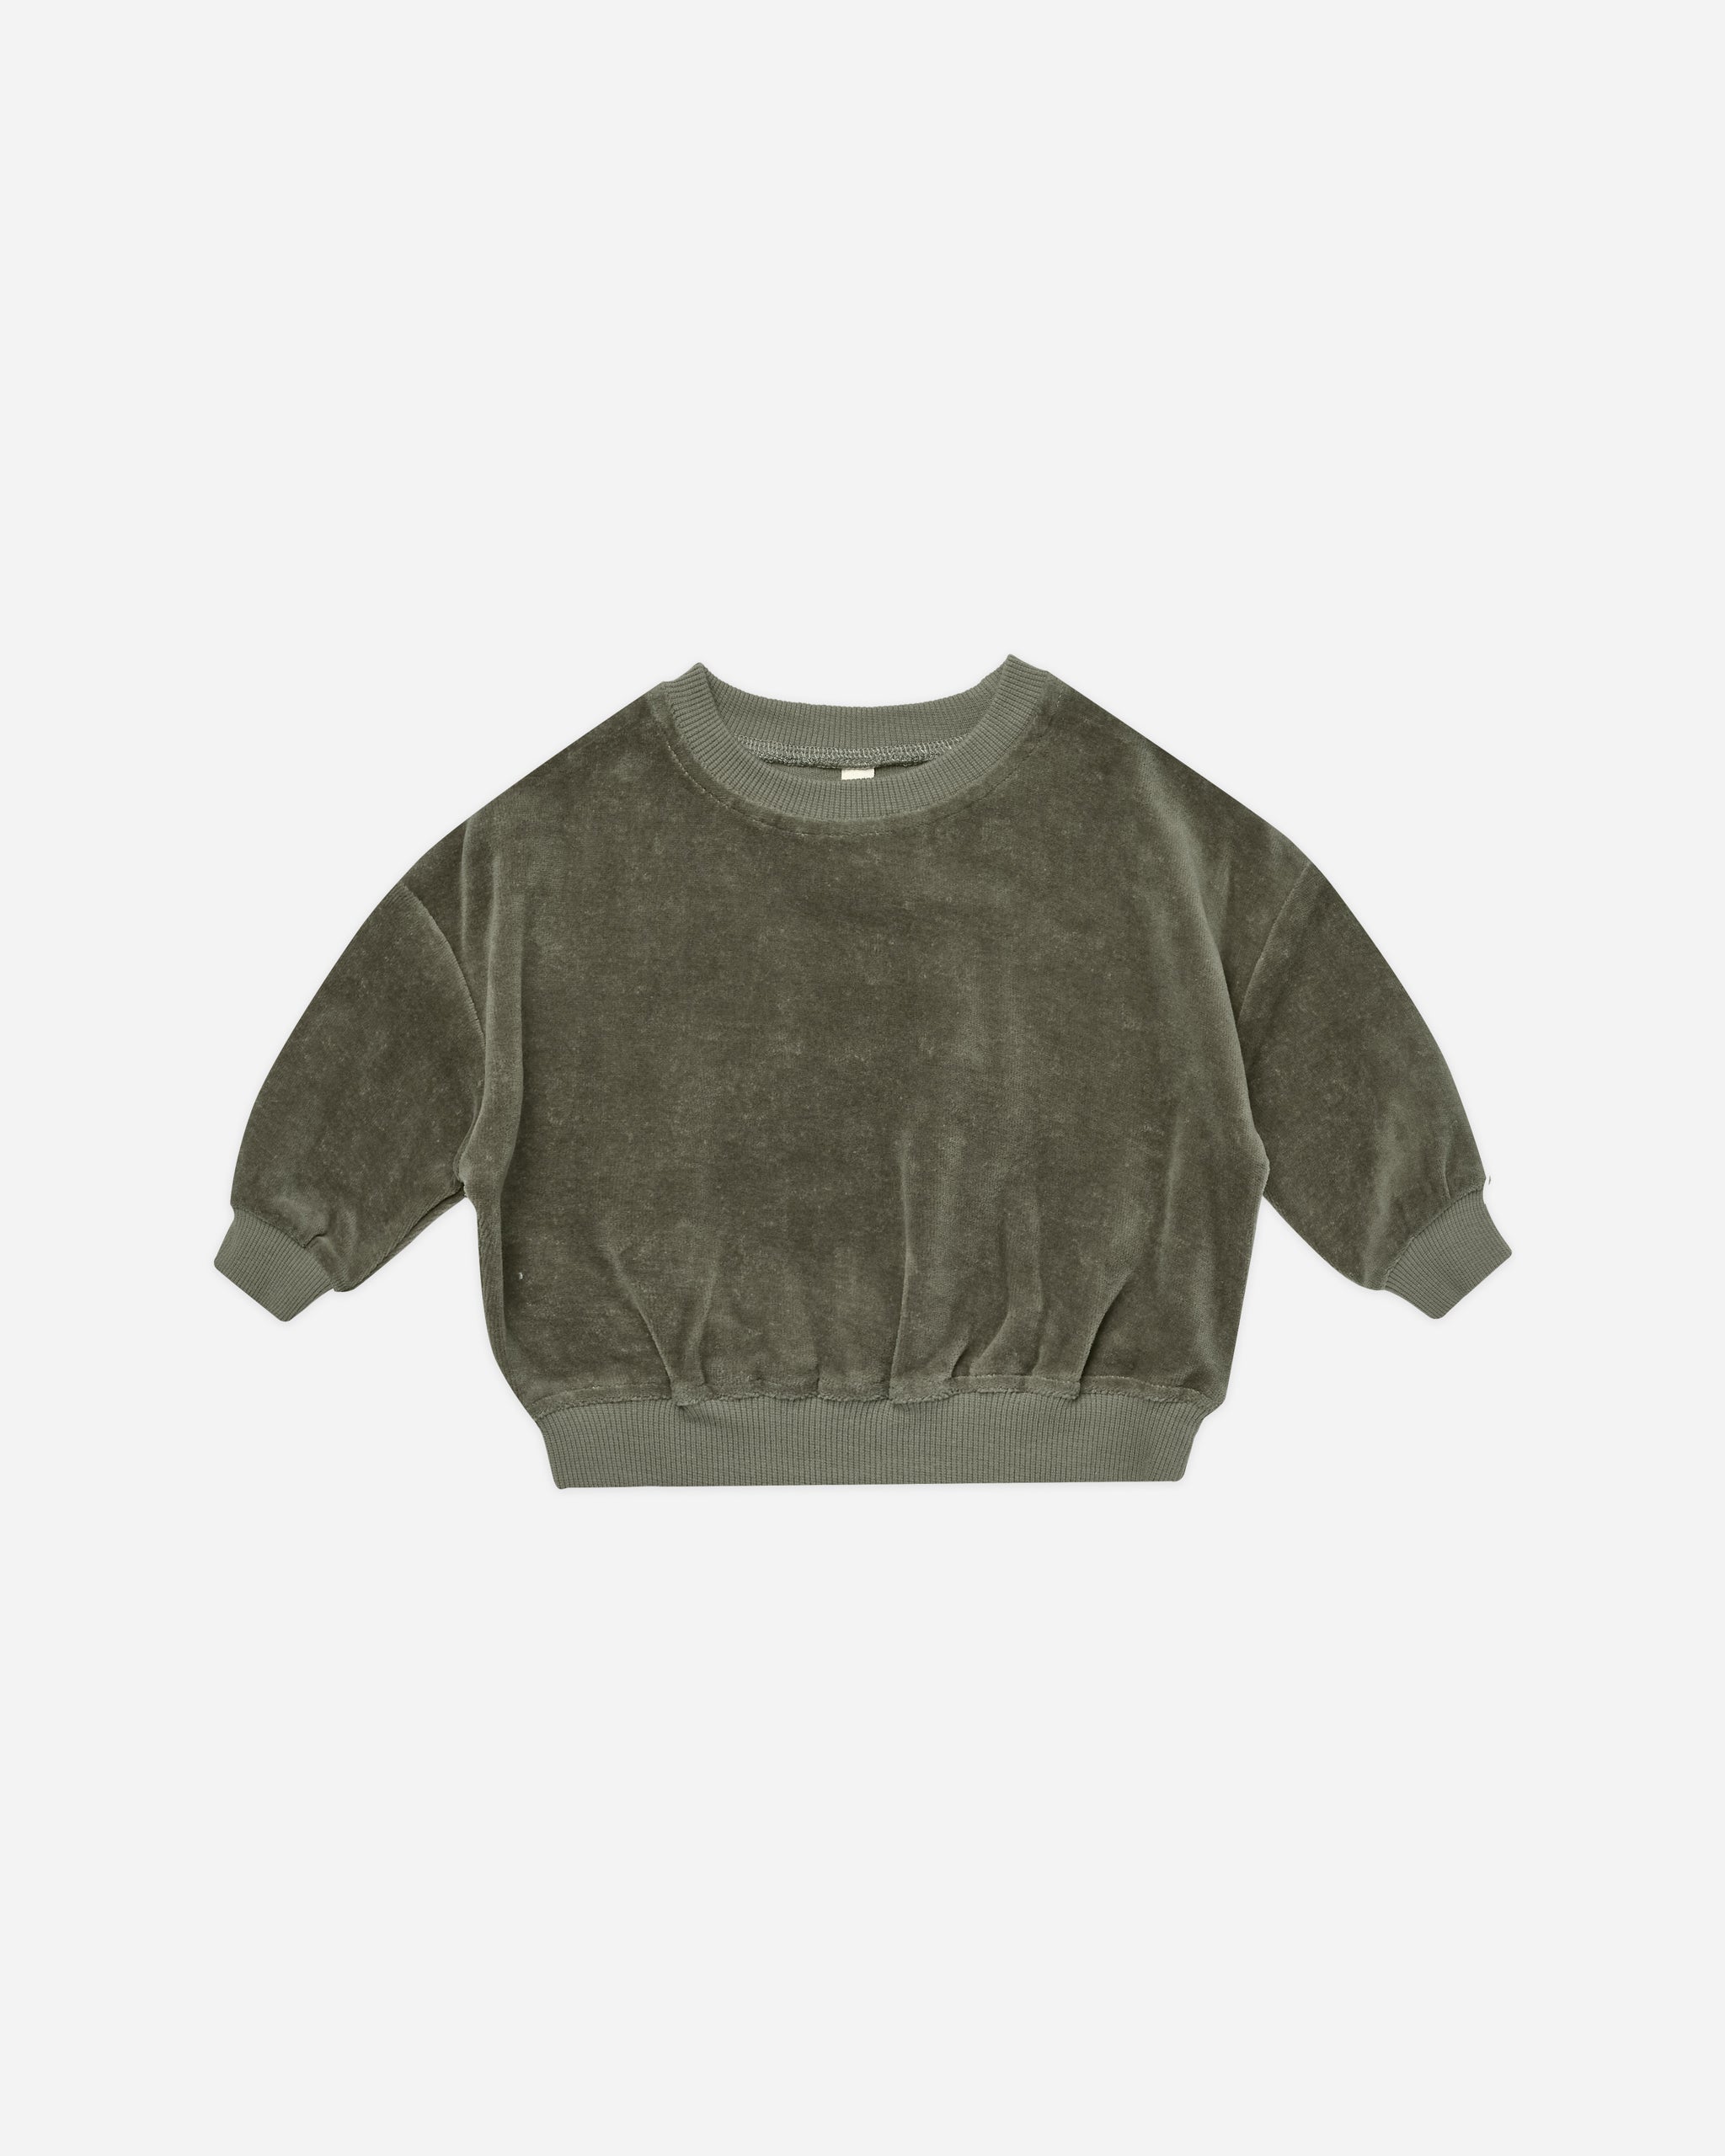 Velour Relaxed Sweatshirt || Forest - Rylee + Cru | Kids Clothes | Trendy Baby Clothes | Modern Infant Outfits |